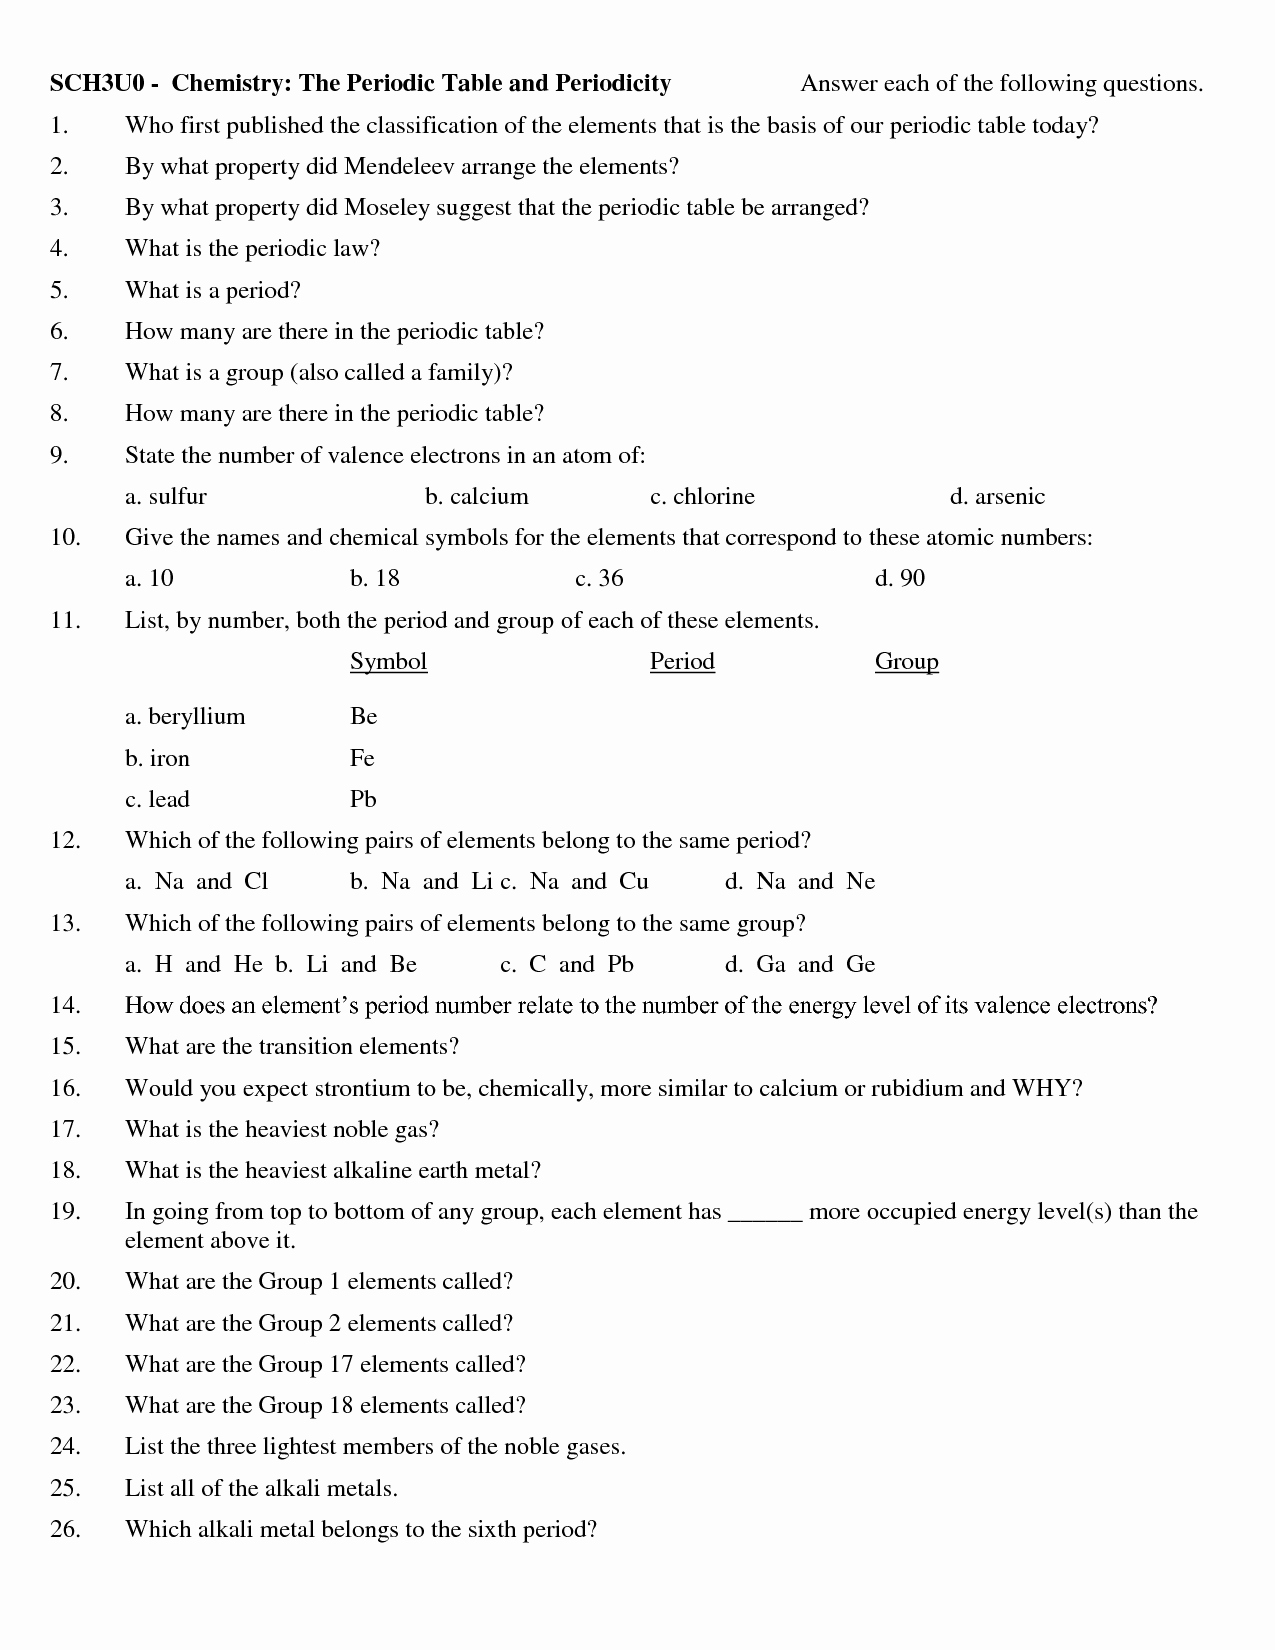 Periodic Trends Practice Worksheet Answers Awesome 20 Best Of Periodic Trends Worksheet Answers Key